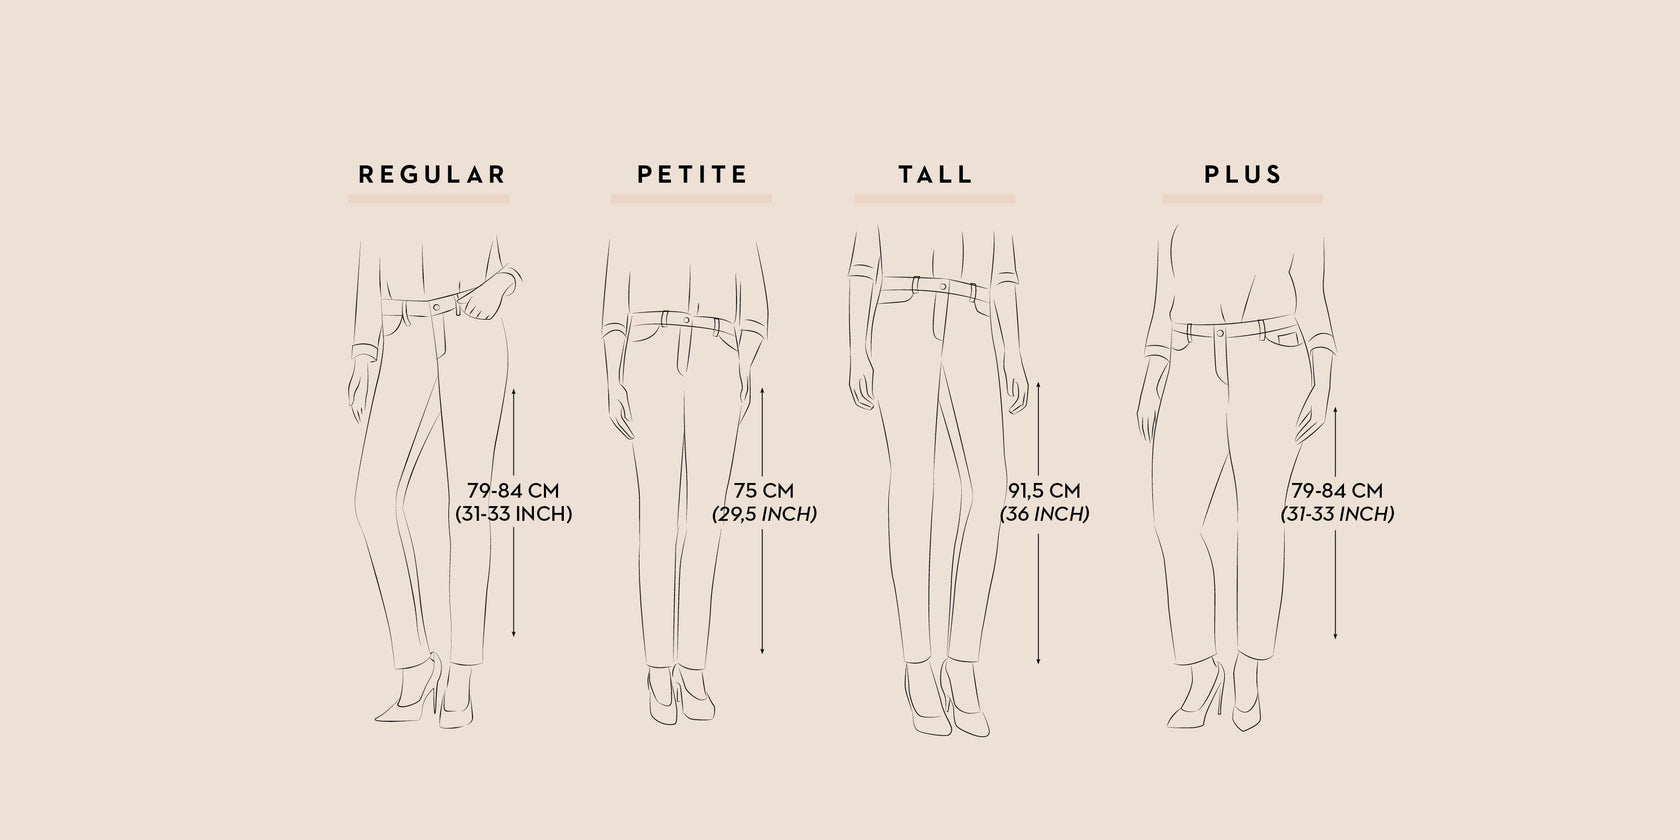 What is the difference between 'petite' sizes and regular sizes in